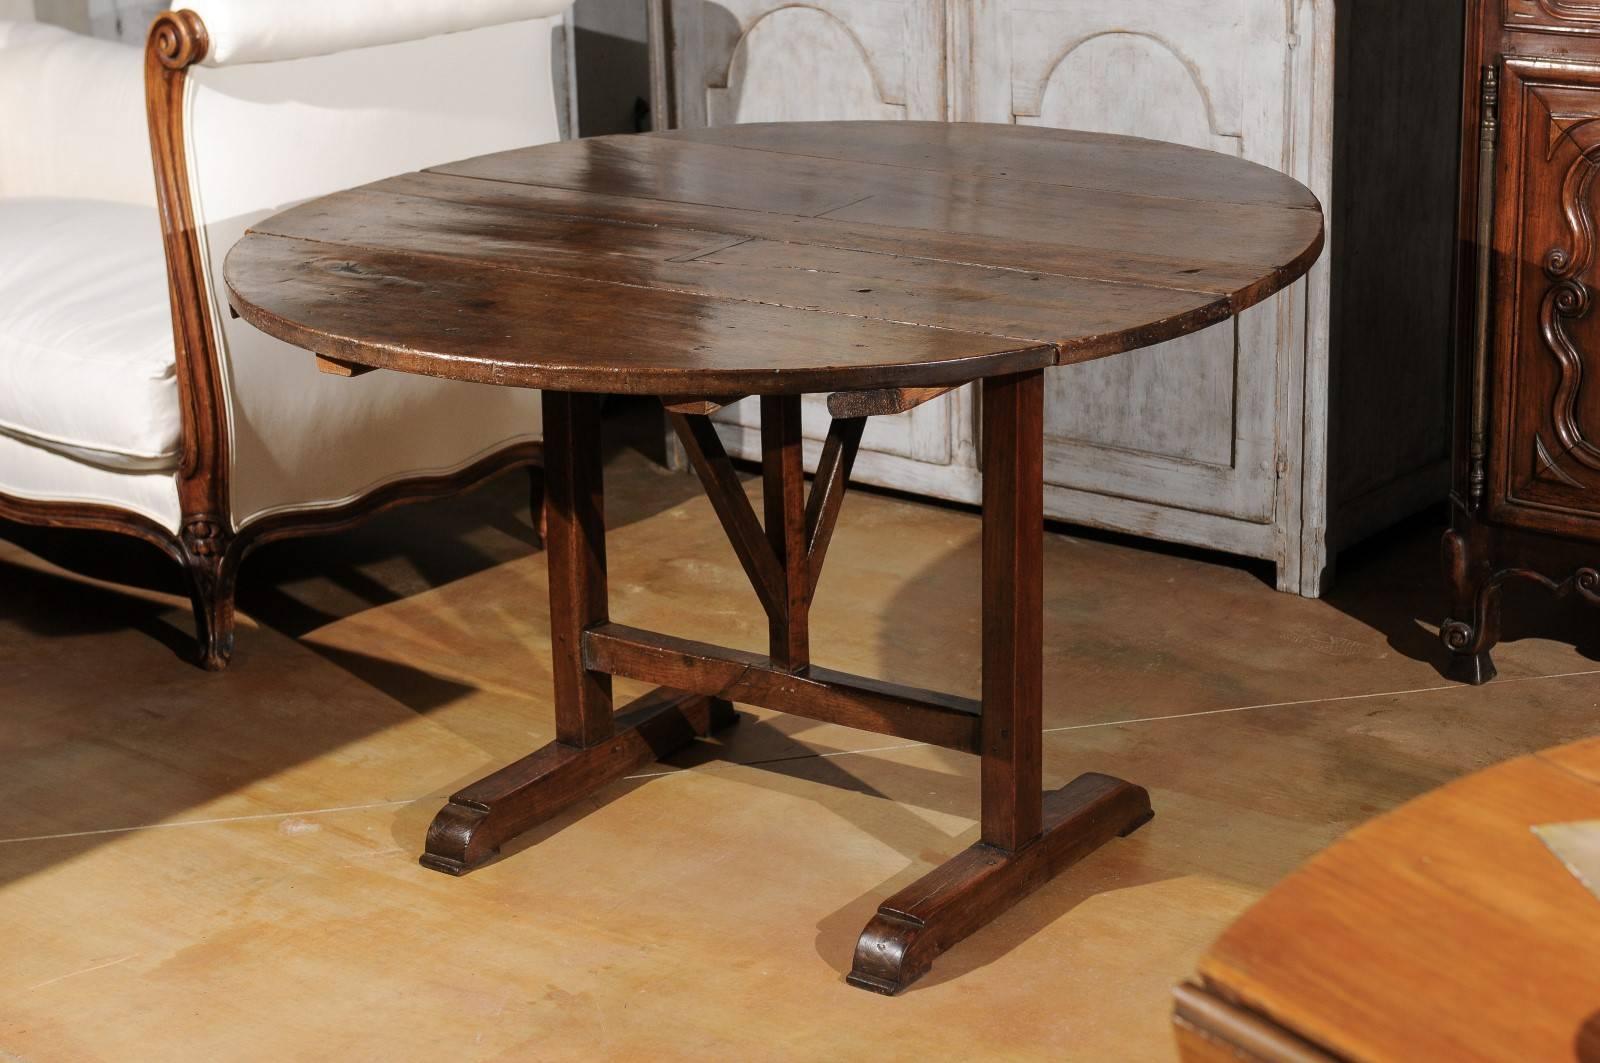 A French wine tasting table with circular top from the mid-18th century. This French wine tasting table features a round tilt-top, raised on a trestle base with rotating wedge, on which the top will rest once opened. Wine tasting tables were